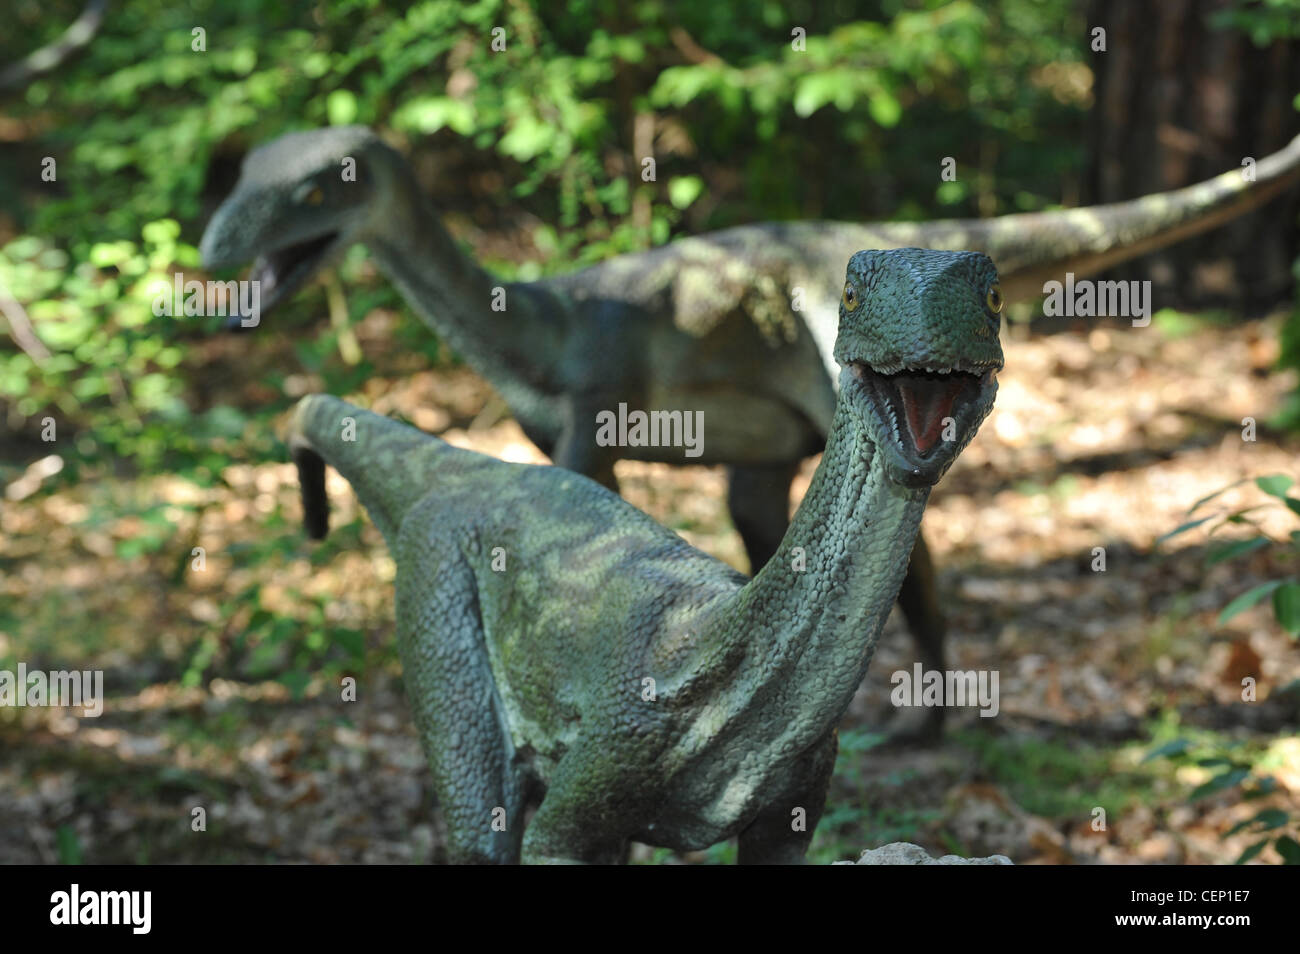 Life size statue of a velociraptors in forest scenery Stock Photo